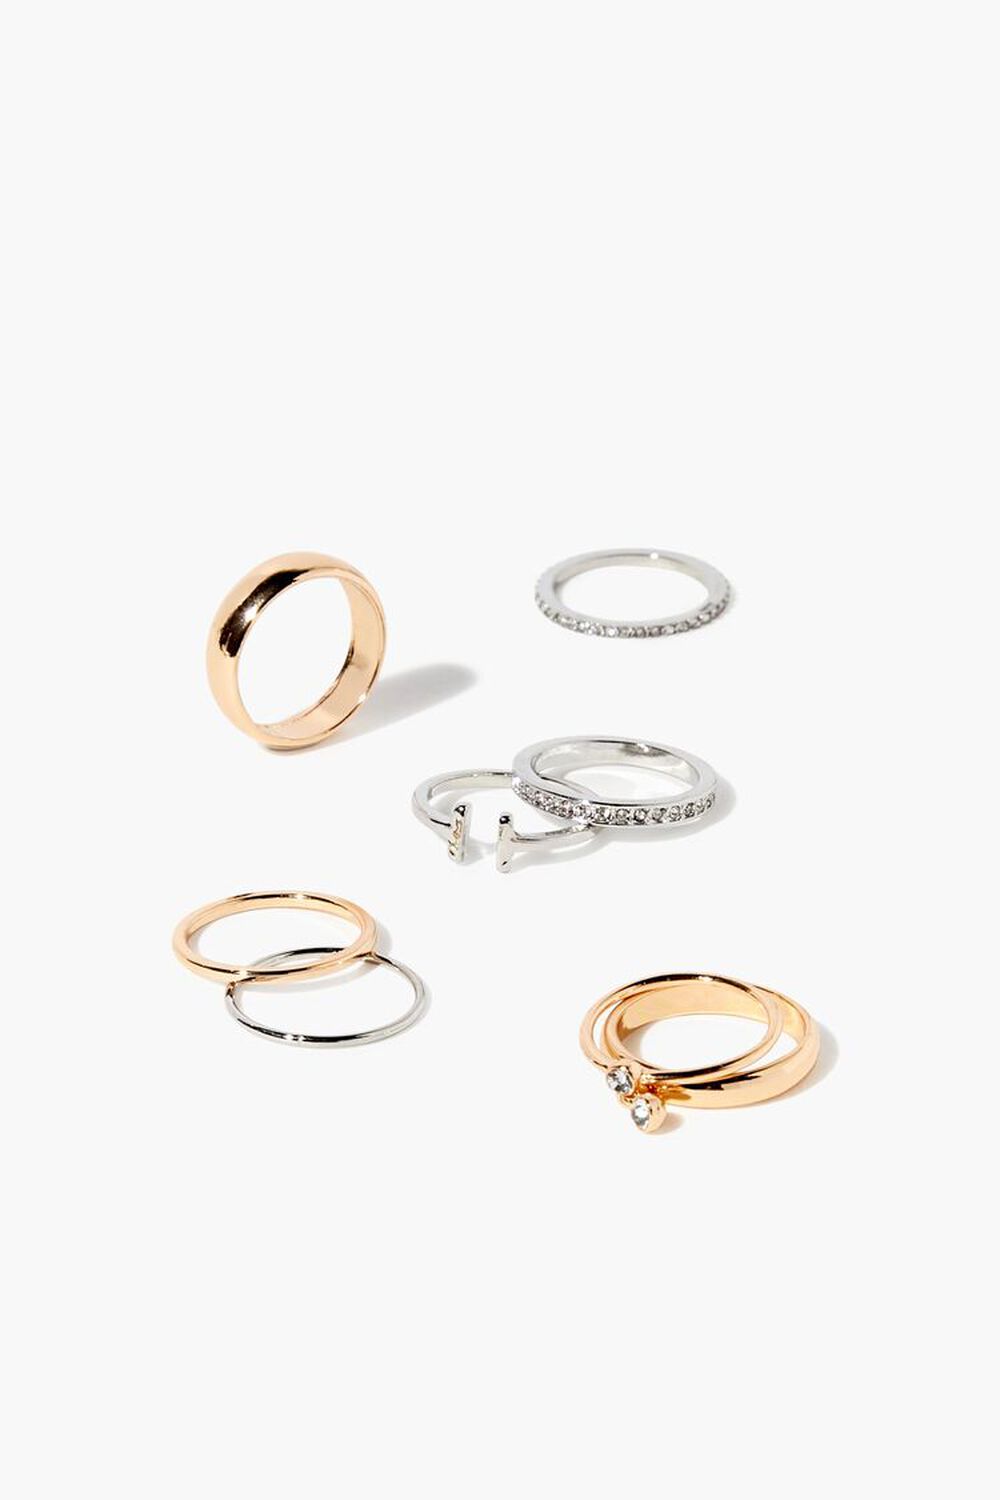 GOLD/SILVER Assorted Ring Set, image 1